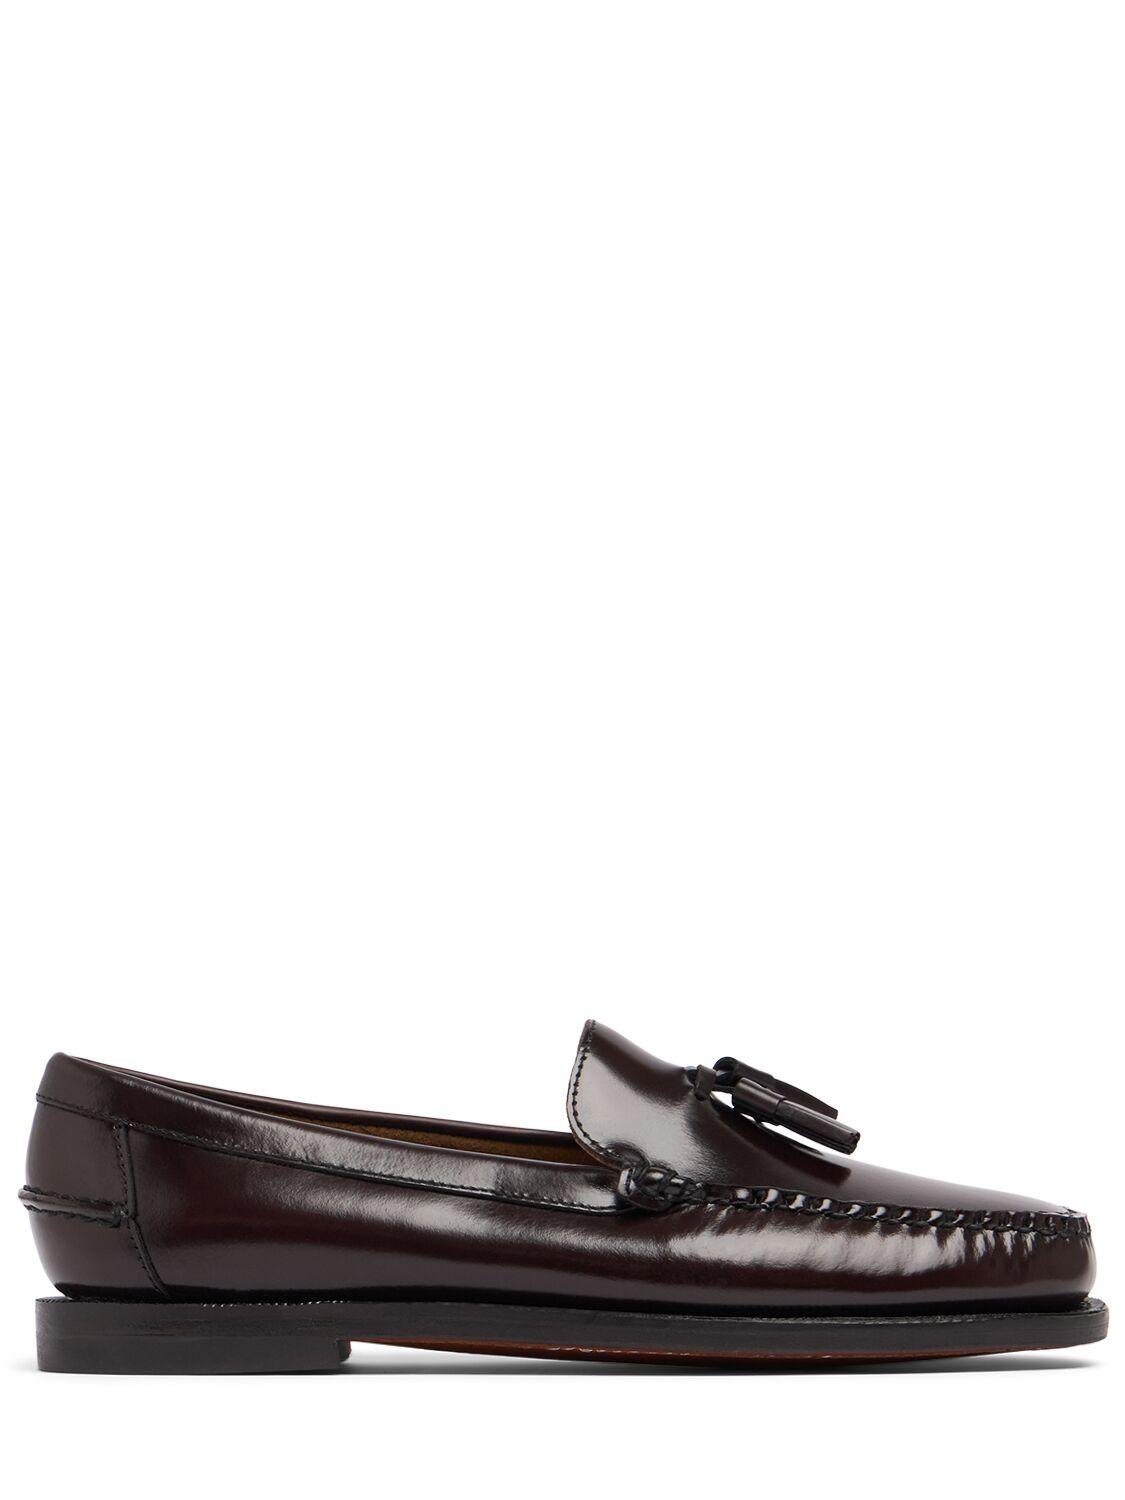 Classic Will Smooth Leather Loafers by SEBAGO